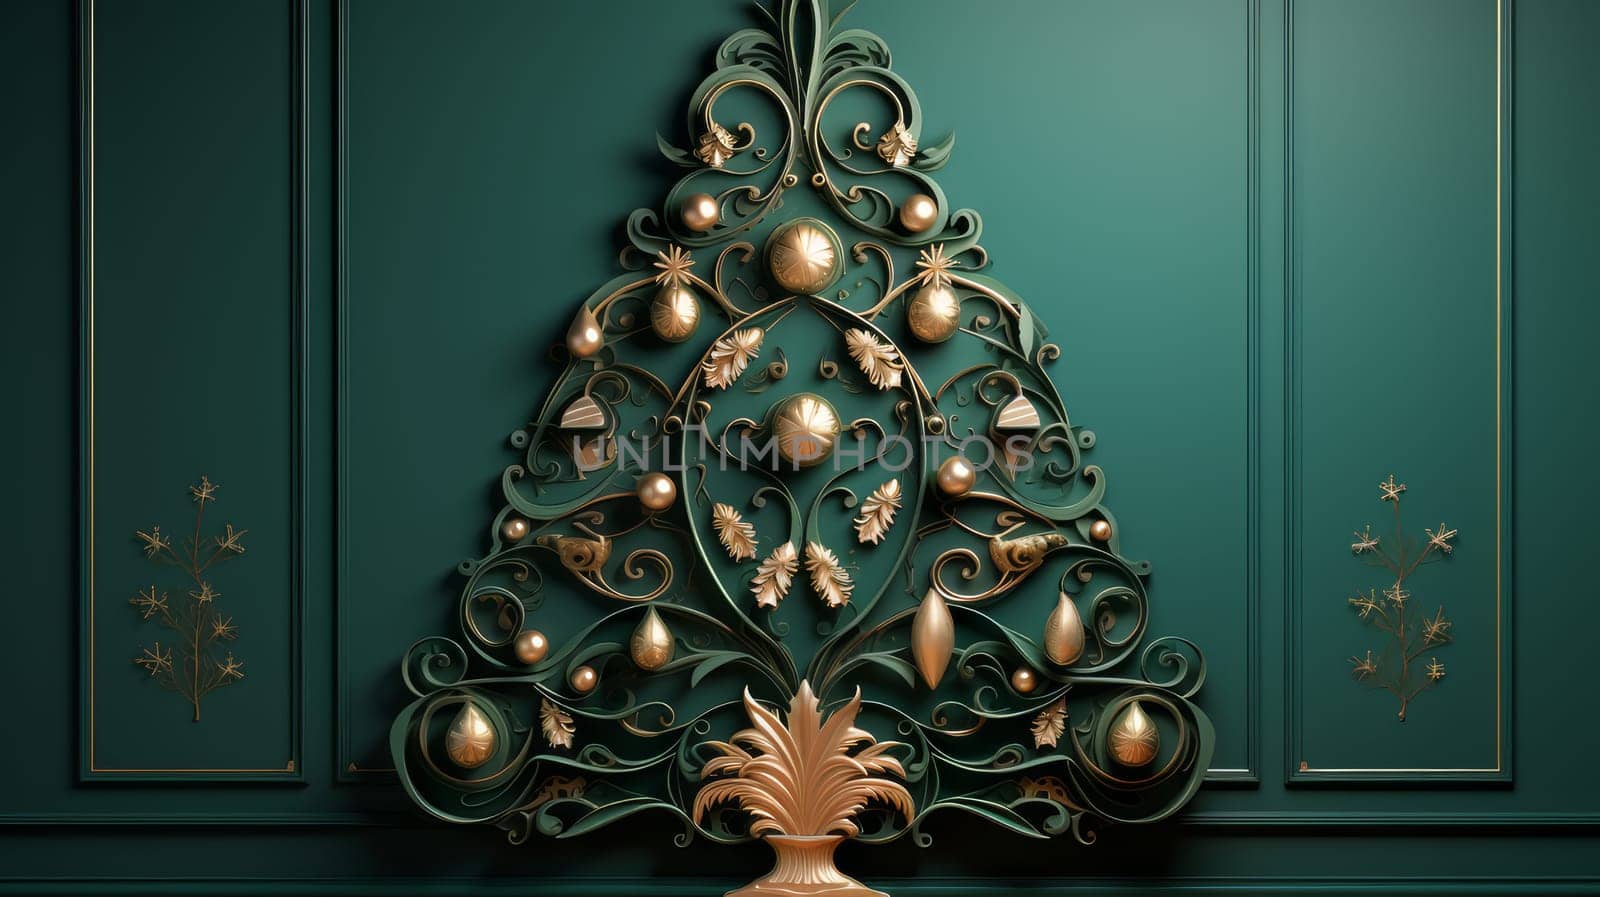 Creative and modern Christmas tree in Art Nouveau style against a green wall. Merry Christmas and Happy New Year concept